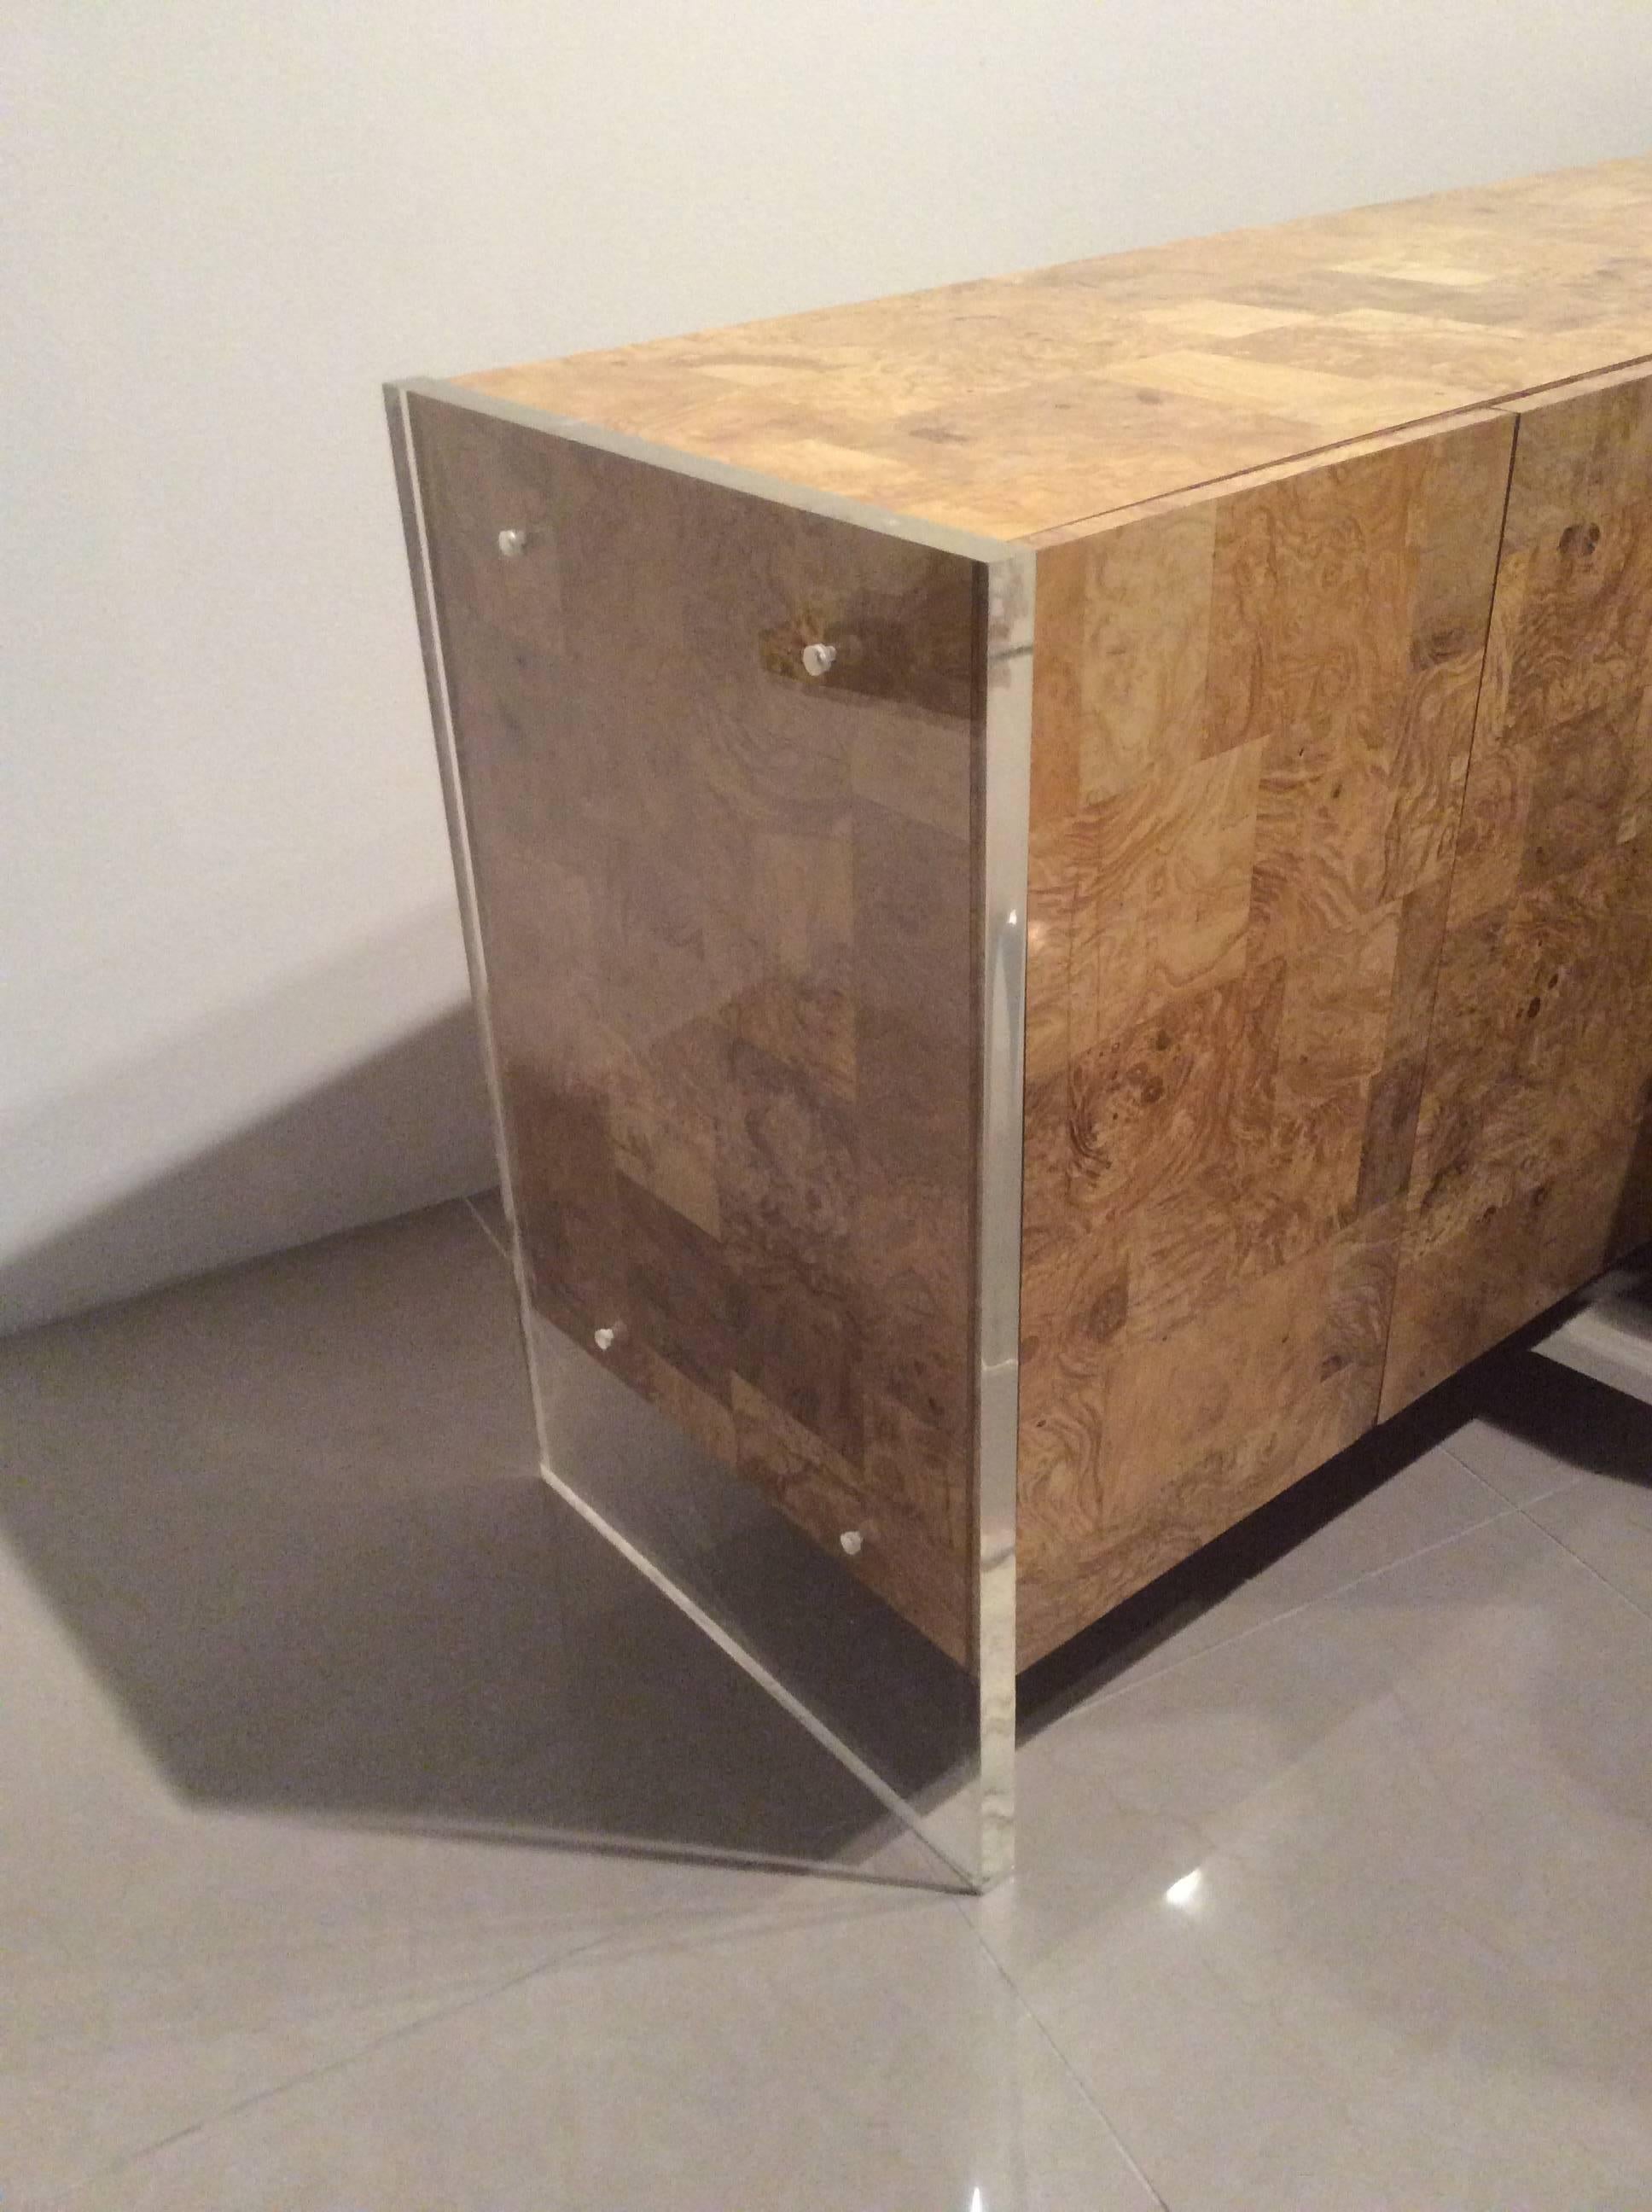 Vintage Hollywood Regency patchwork faux burl wood with Lucite ends credenza, six-door. This piece is finished on all sides including the back so it can literally be placed anywhere in a room since the back is as pretty as the front. The thick